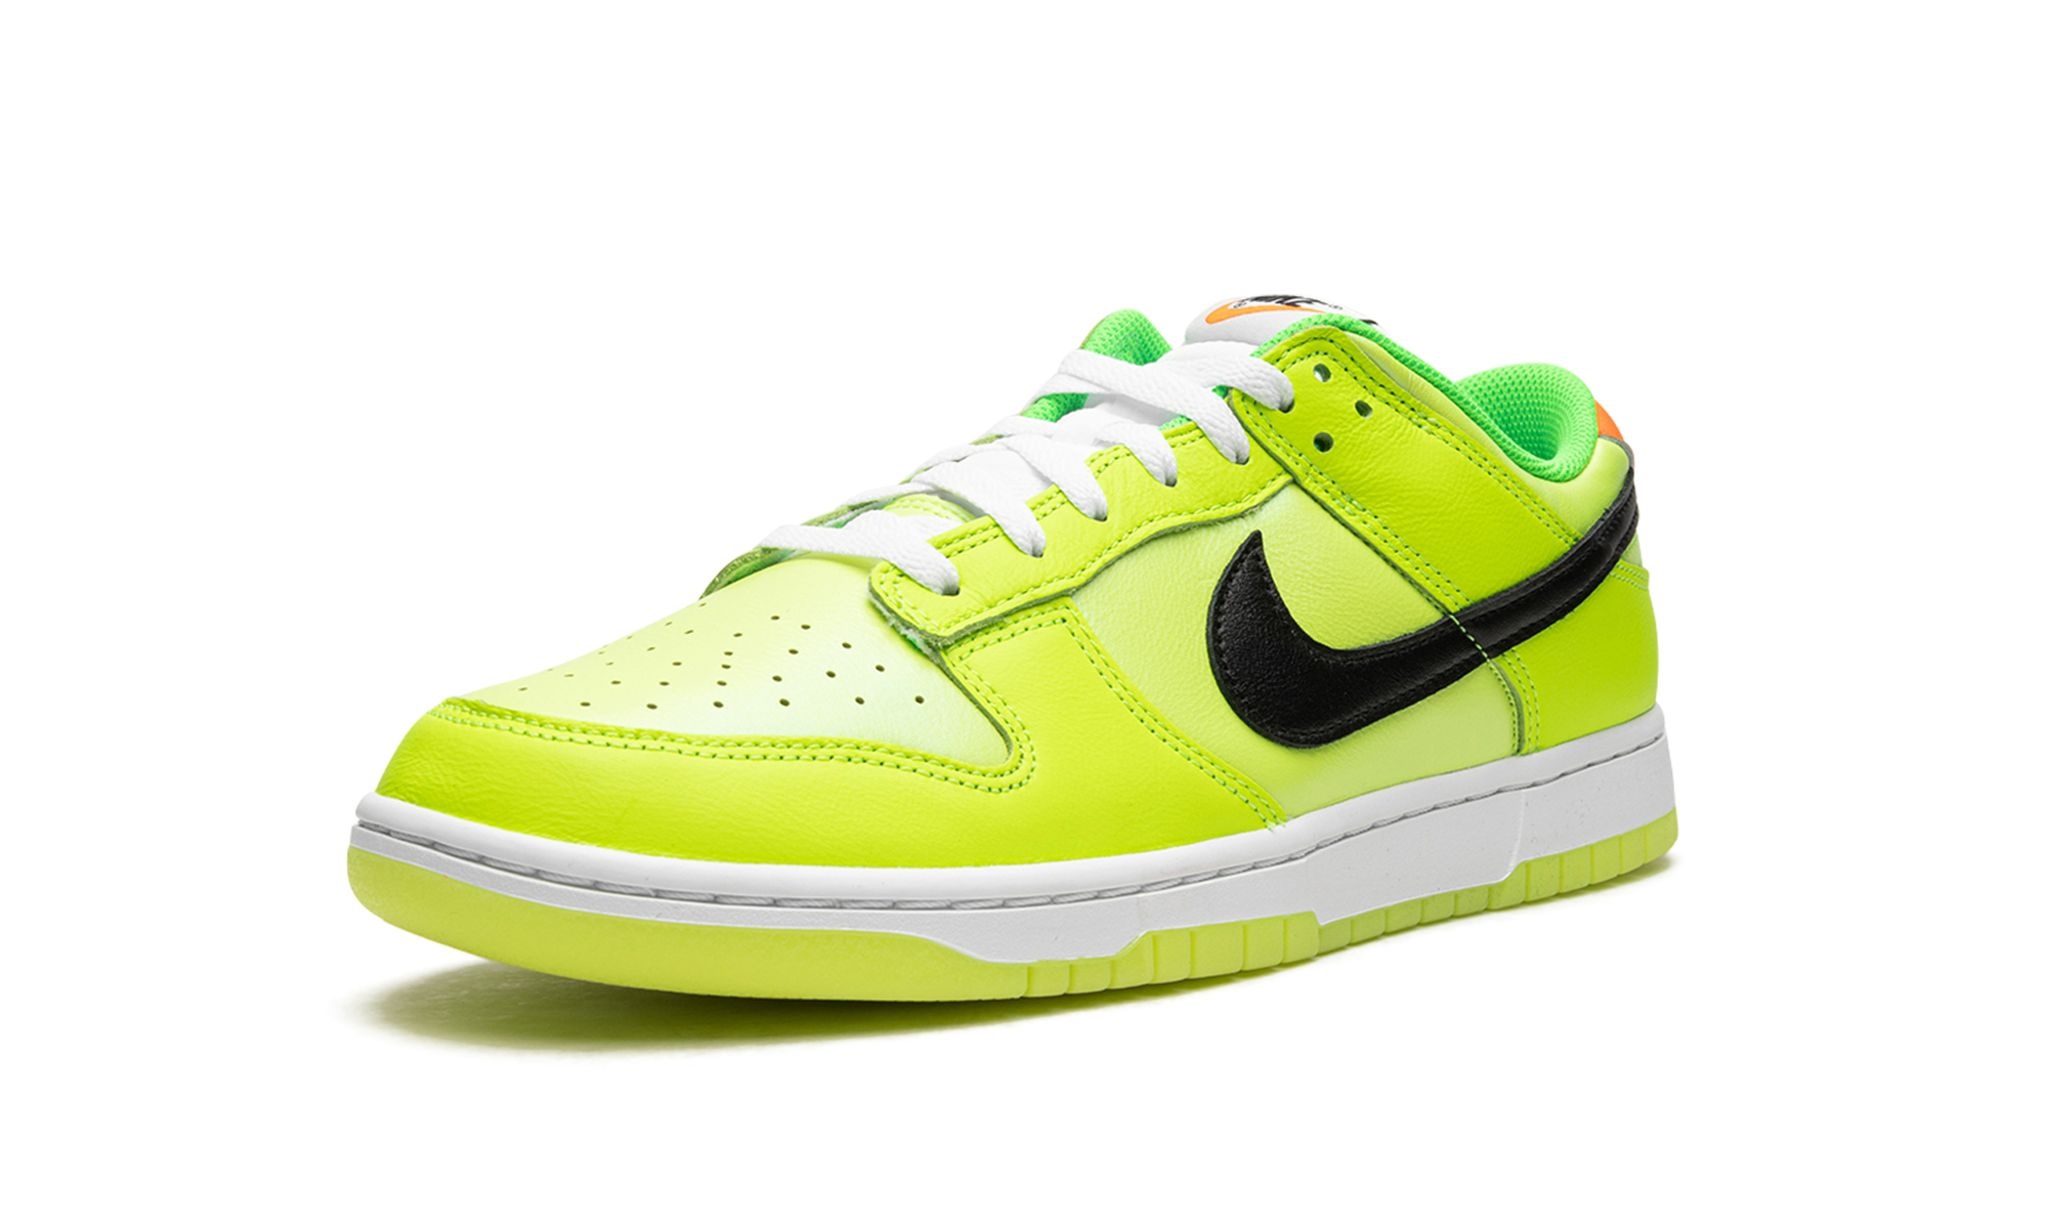 Dunk Low "Glow in the Dark" - 4